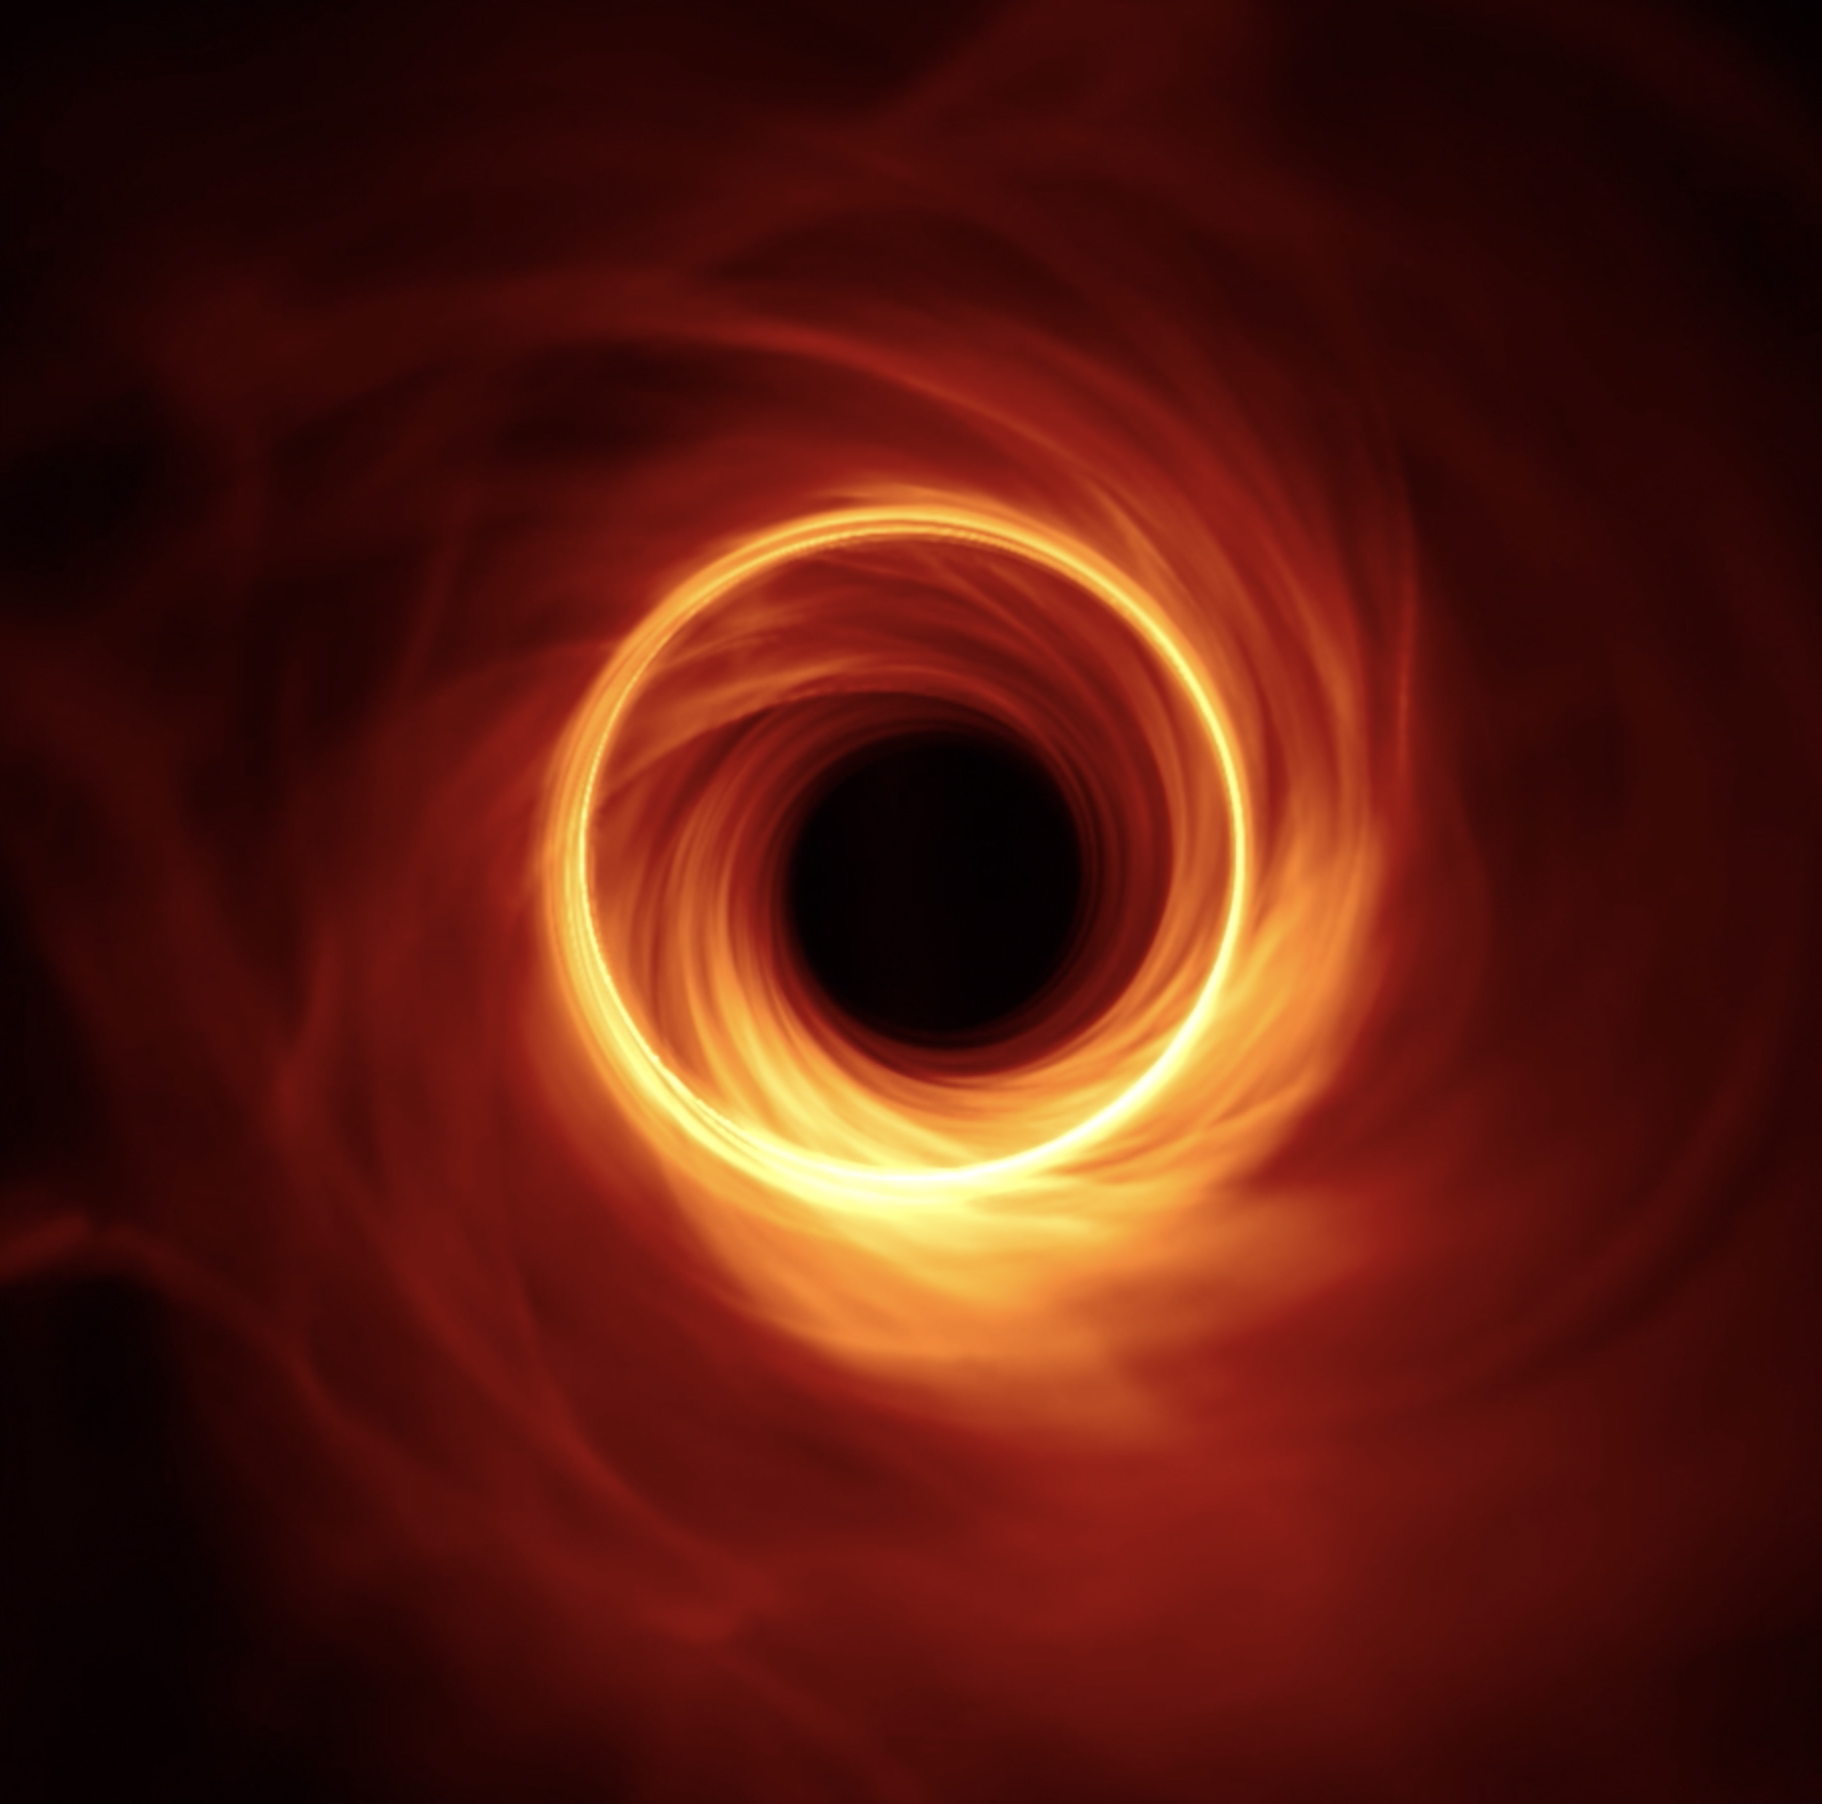 Black holes cast a shadow on the image of bright surrounding material because their strong gravitational field can bend and trap light.